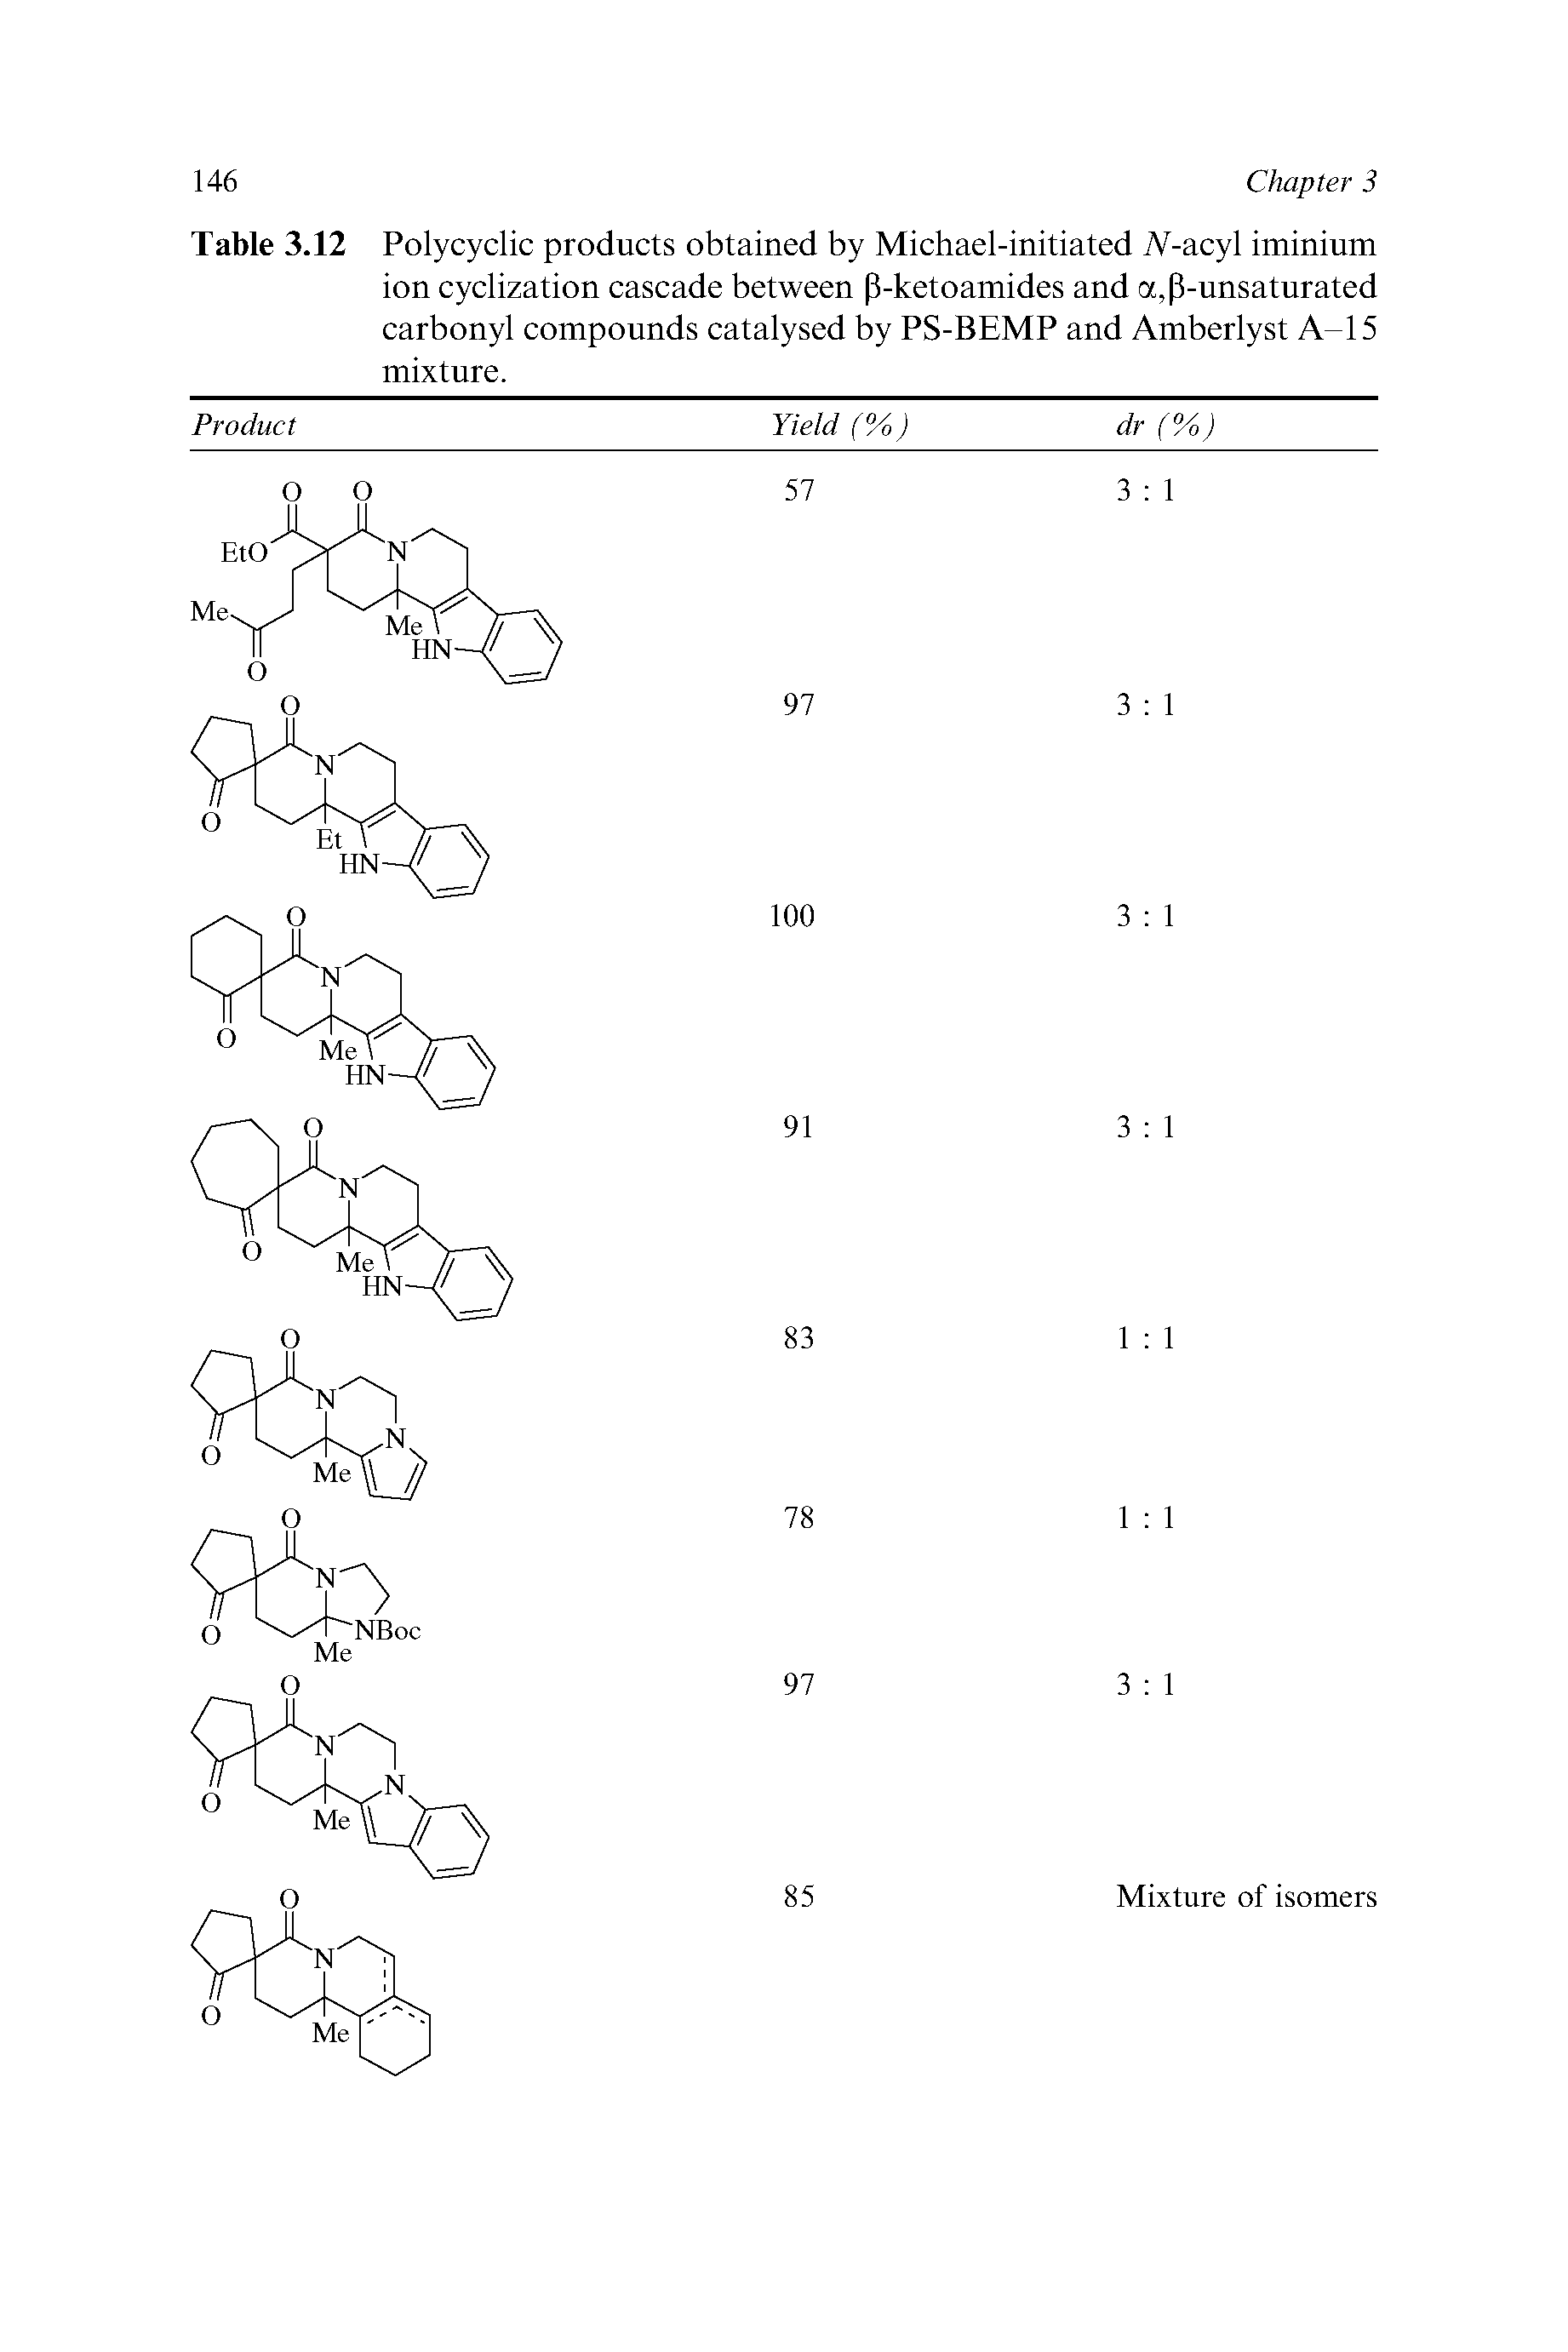 Table 3.12 Polycyclic products obtained by Michael-initiated A-acyl iminium ion cyclization cascade between p-ketoamides and a,p-unsaturated carbonyl compounds catalysed by PS-BEMP and Amberlyst A-15 mixture.